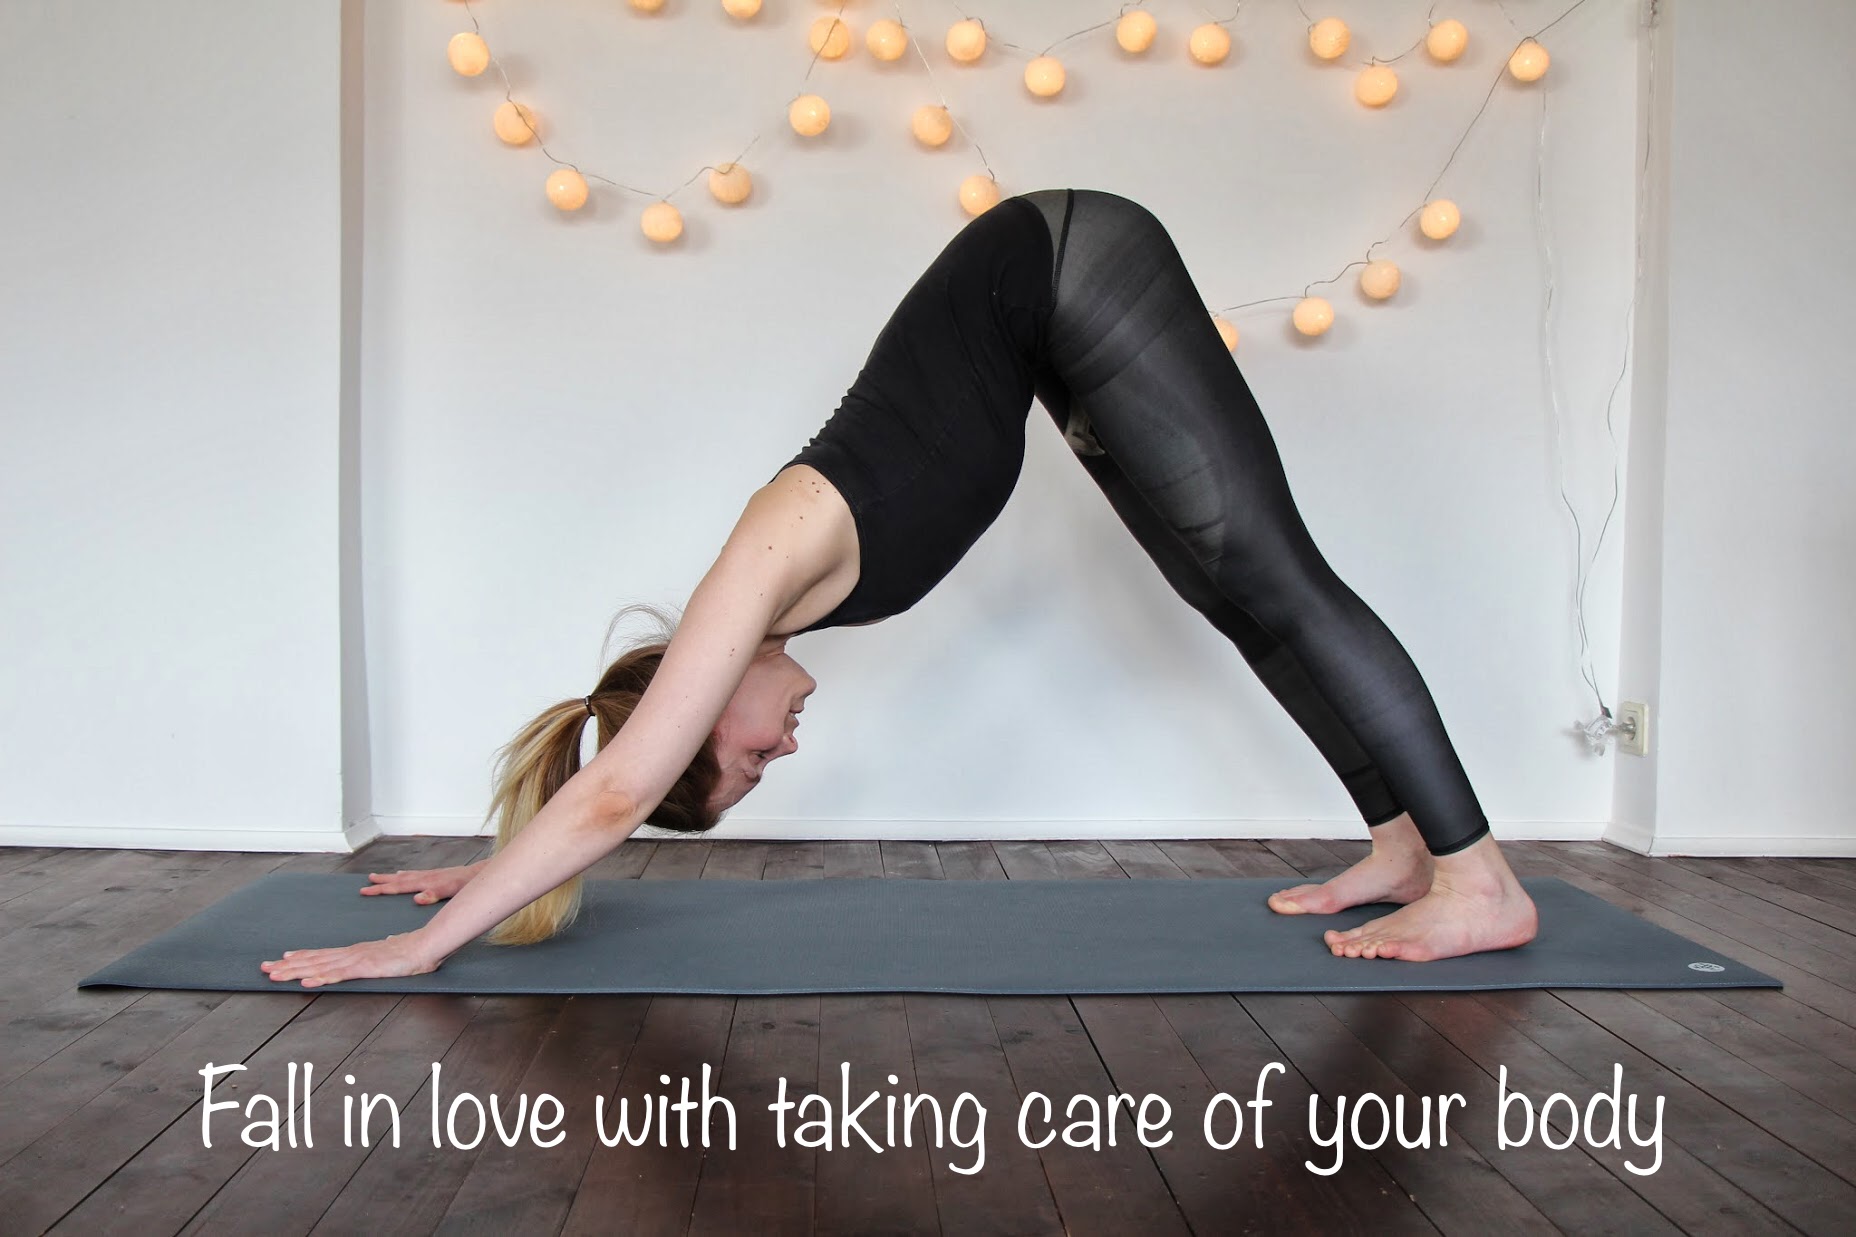 Fall in love with taking care of your body!